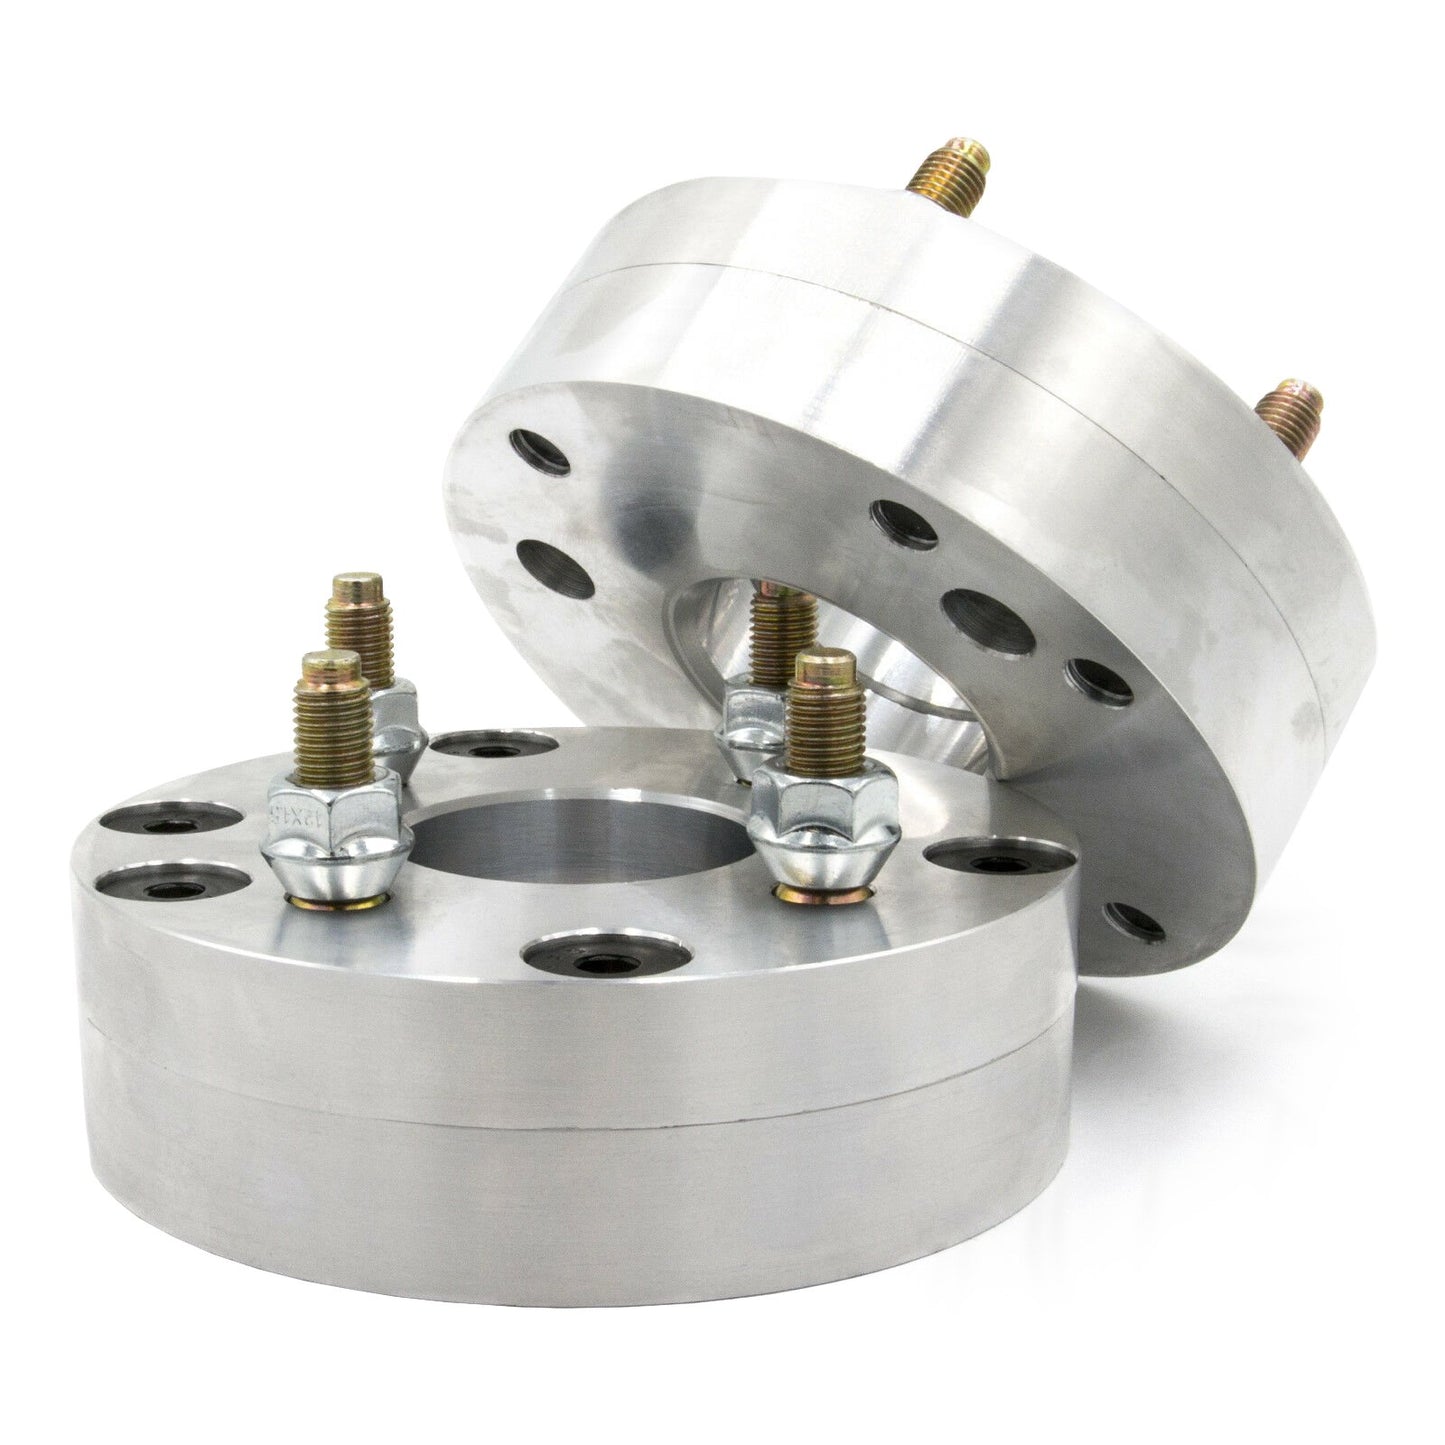 5x4.25" to 4x4.25" 2 piece Wheel Adapter - Thickness: 1.5" - 3"